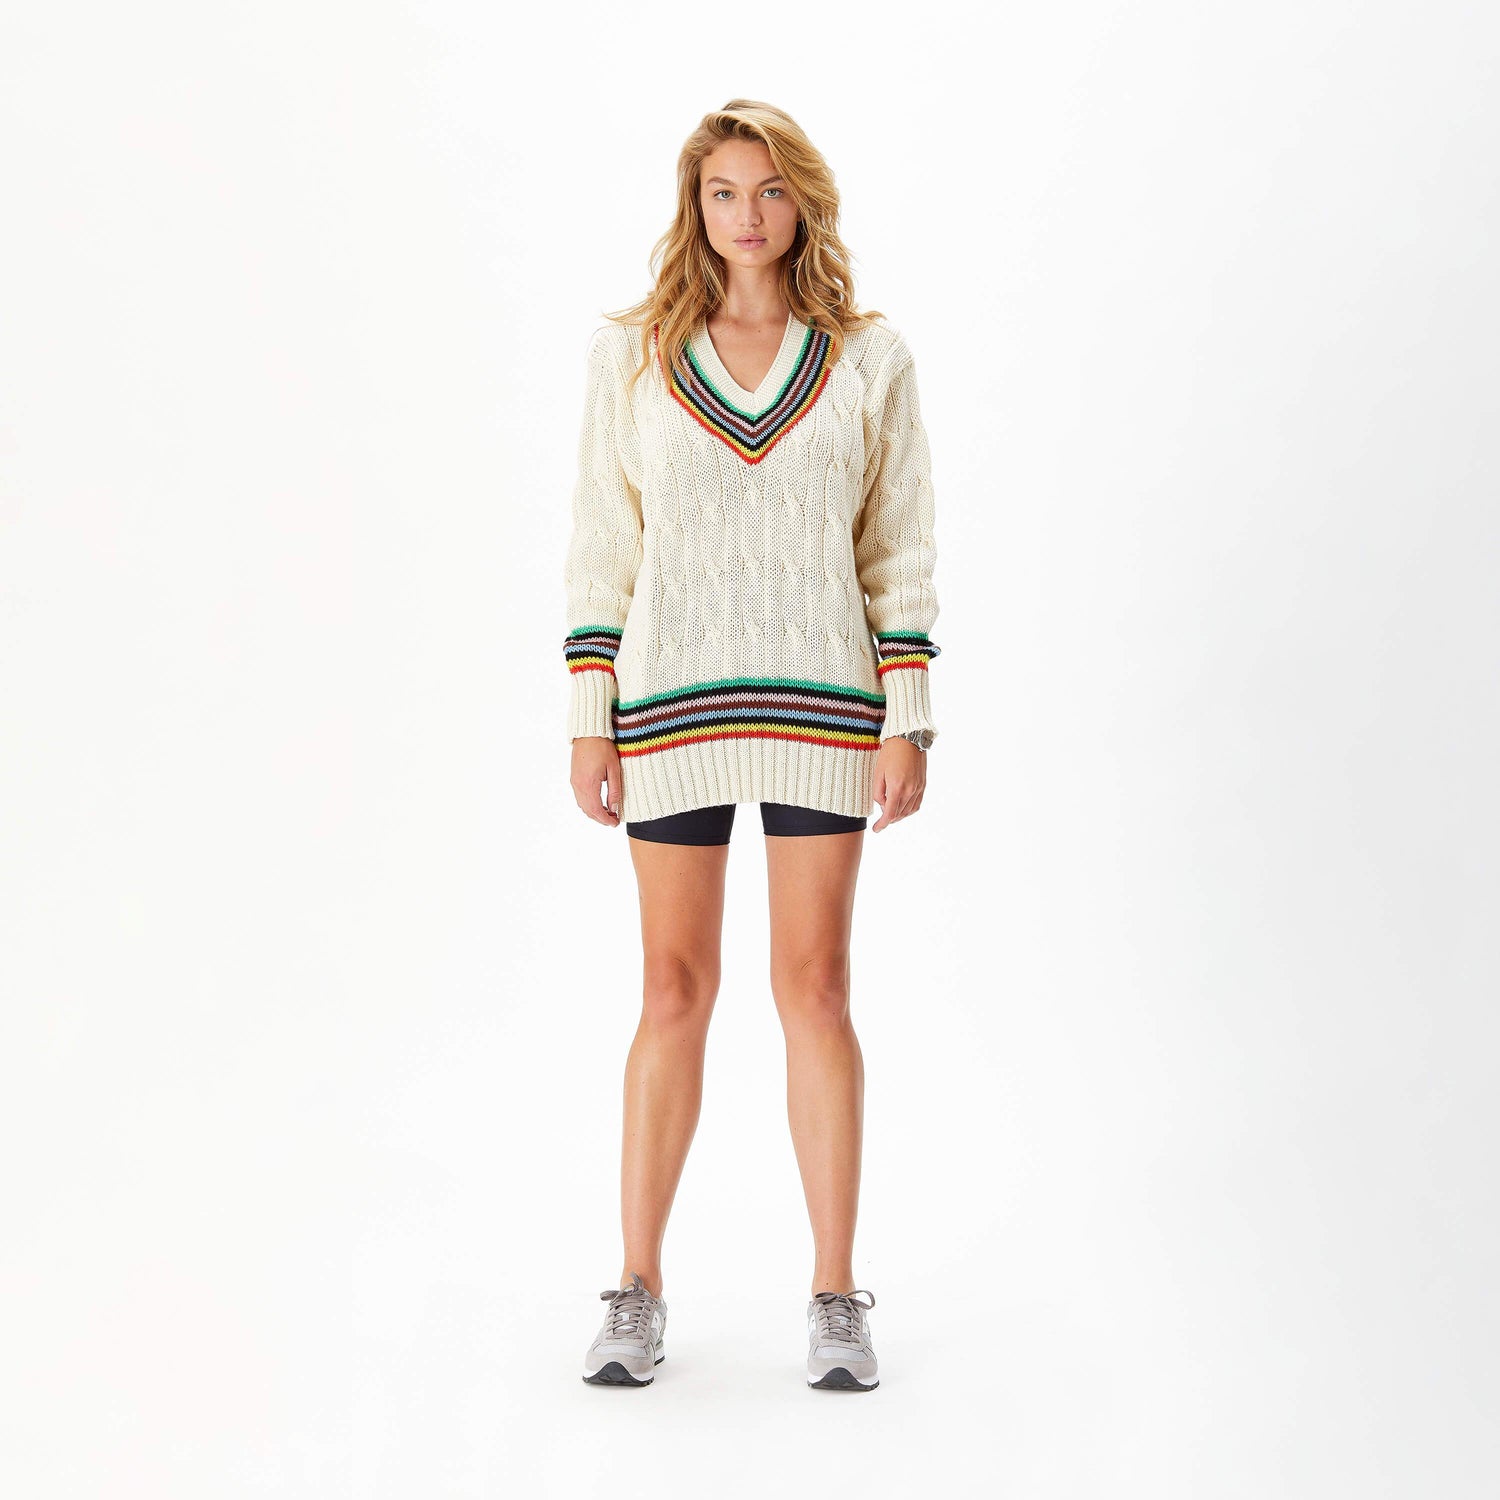 Female model wearing the Cream Wool Cricket Sweater in the Croquet Stripe colorway.